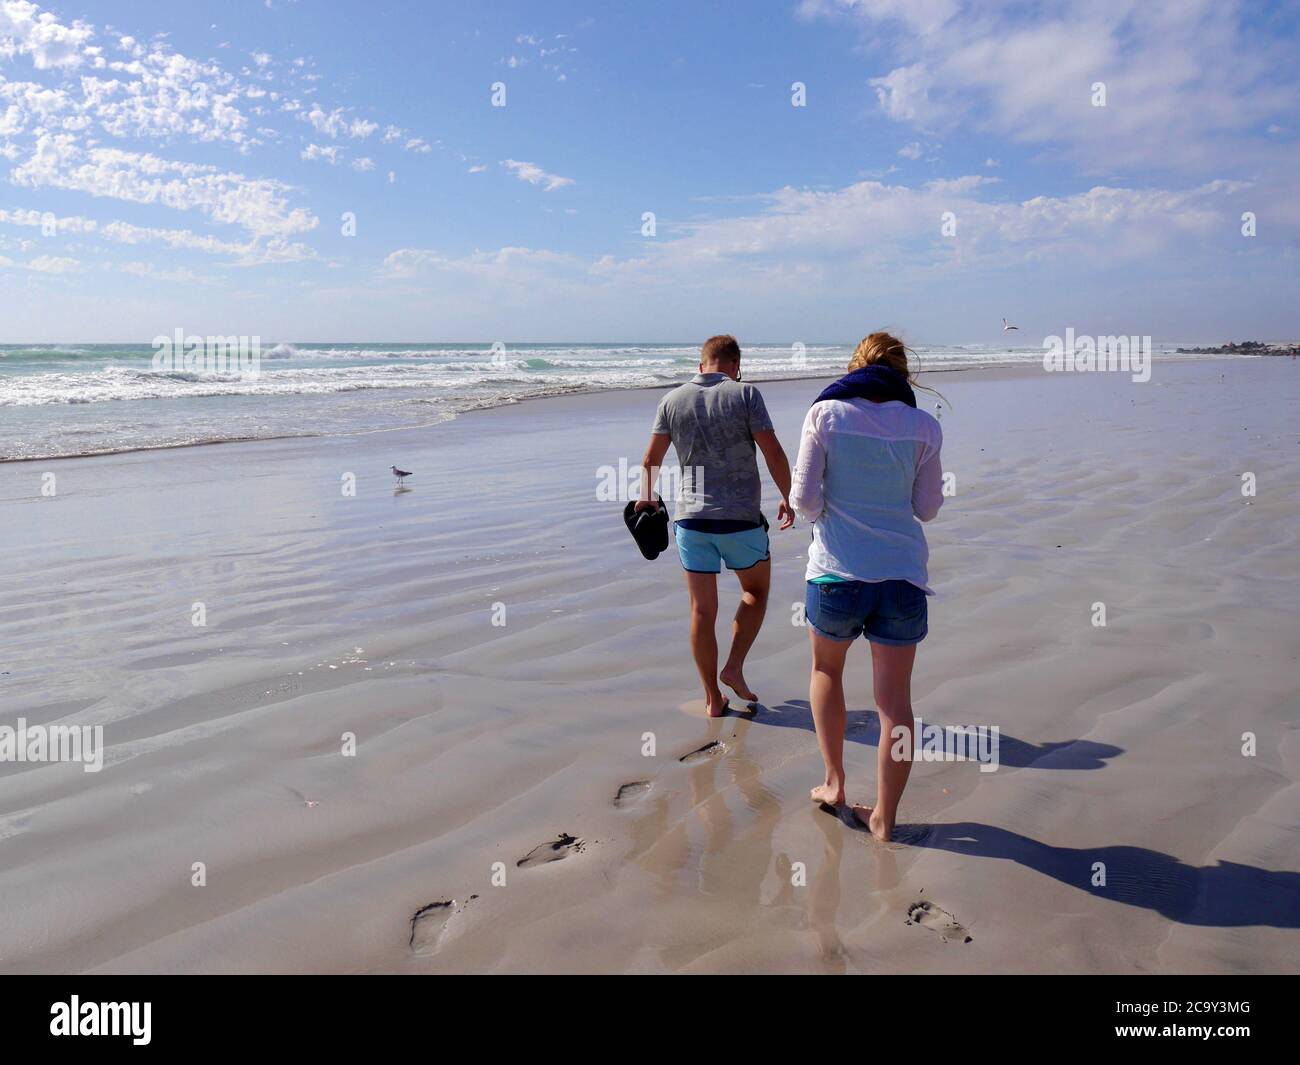 Young couple in summer clothes walking on deserted, white sand beach Stock Photo